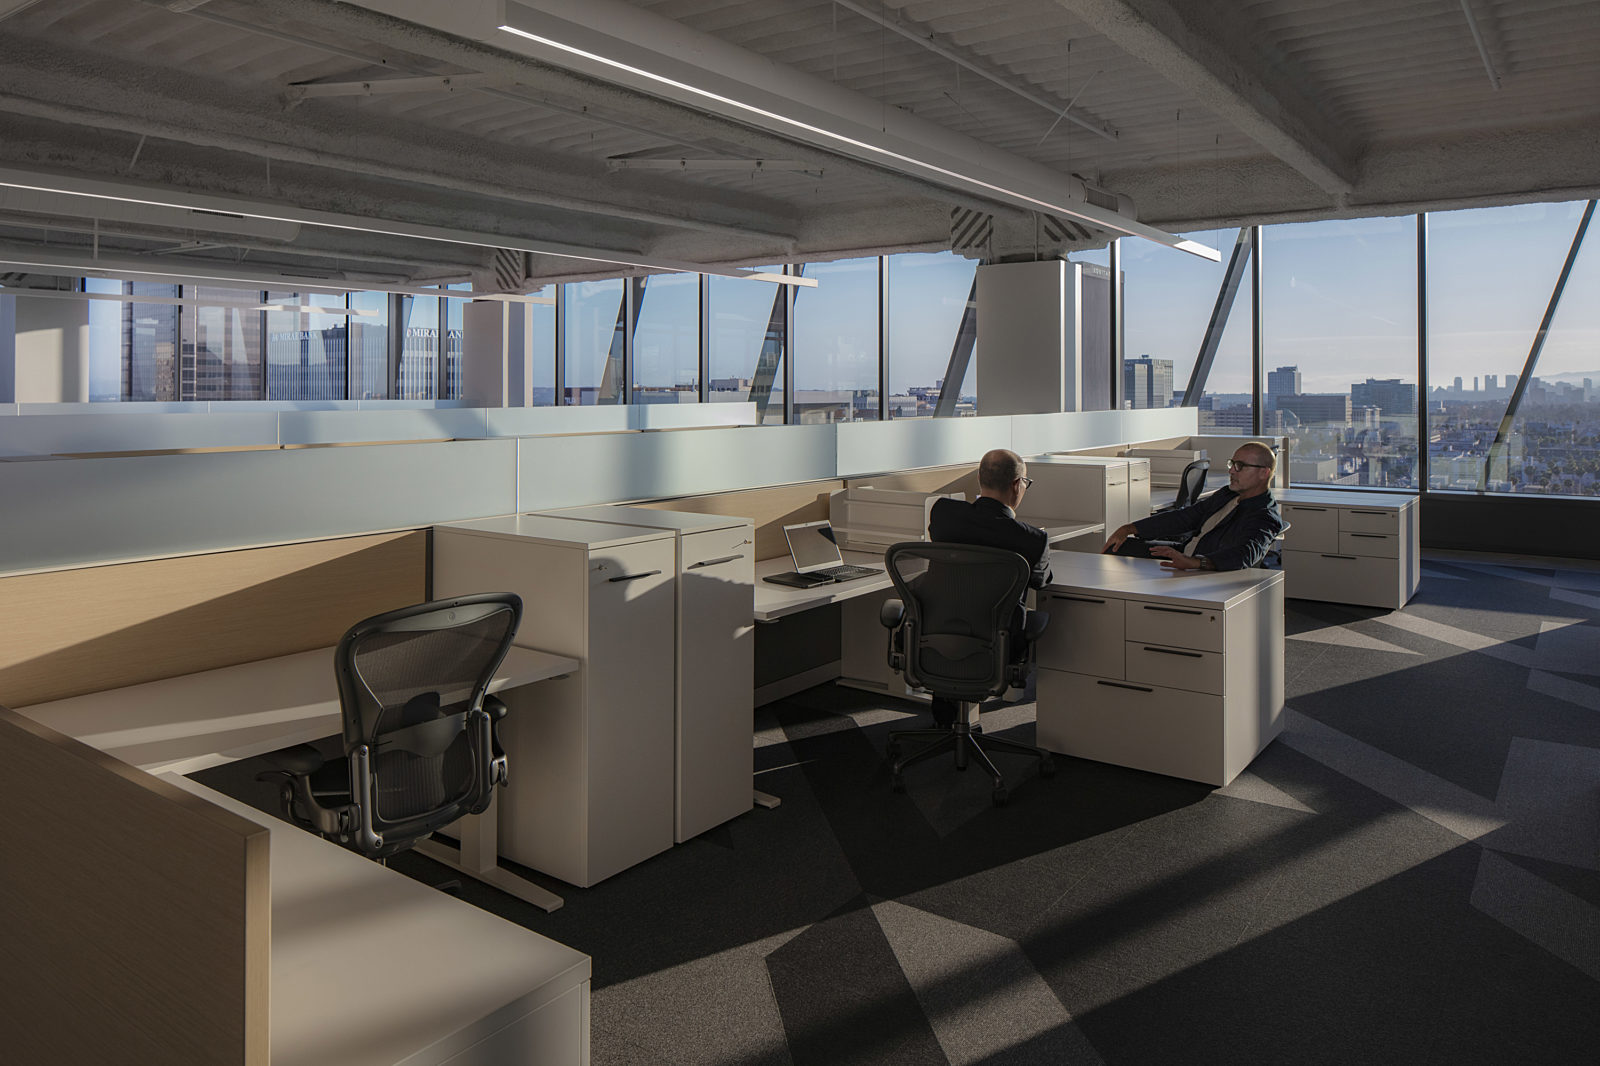 Wooden partitions create individual workstations in a space with stunning city views visible through the French windows.